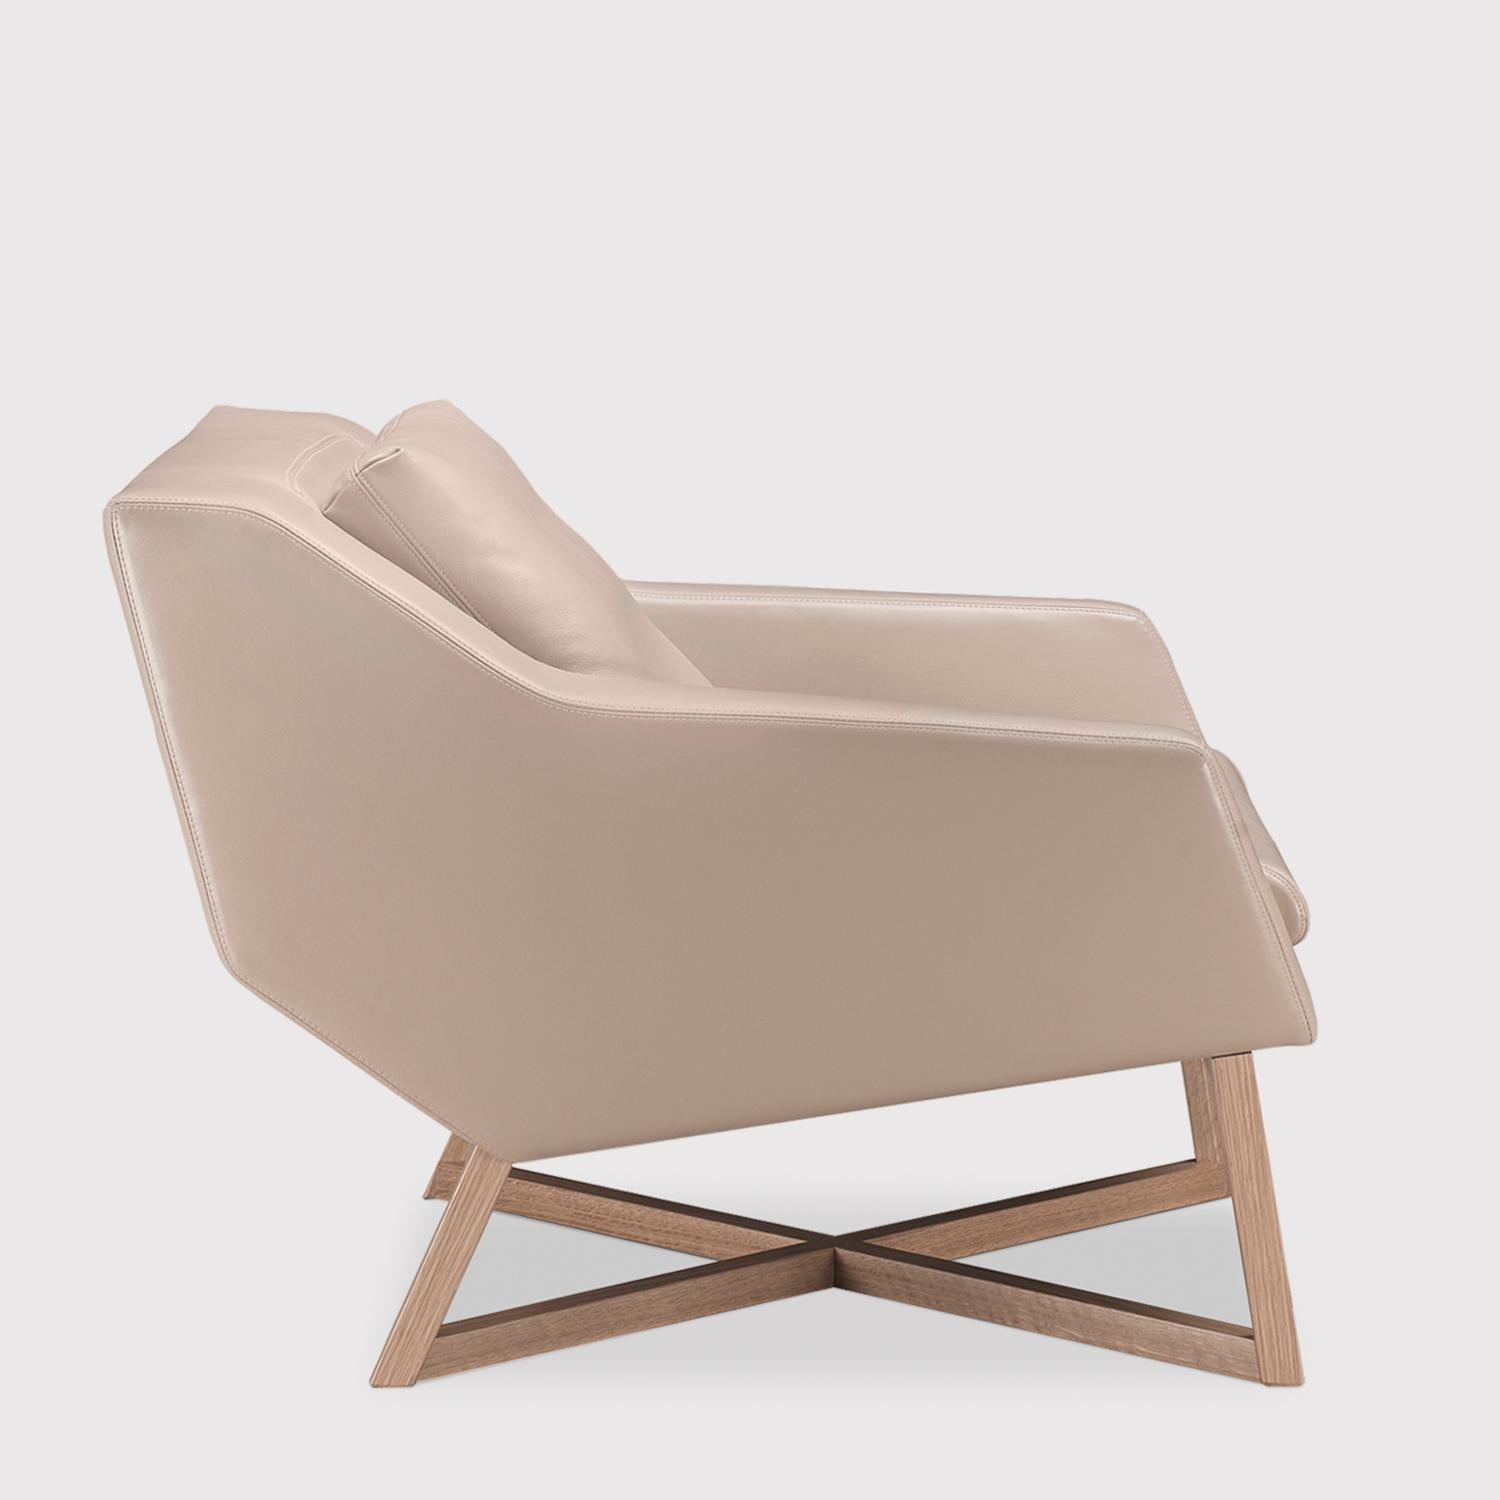 The form of the GT Timber base armchair is finely sculptured; ergonomics and self expression successfully coexist to produce an armchair that is dynamic and distinctive.

Finishes timber: Natural oak, chalk oak, mocca oak, carbon oak, natural ash,